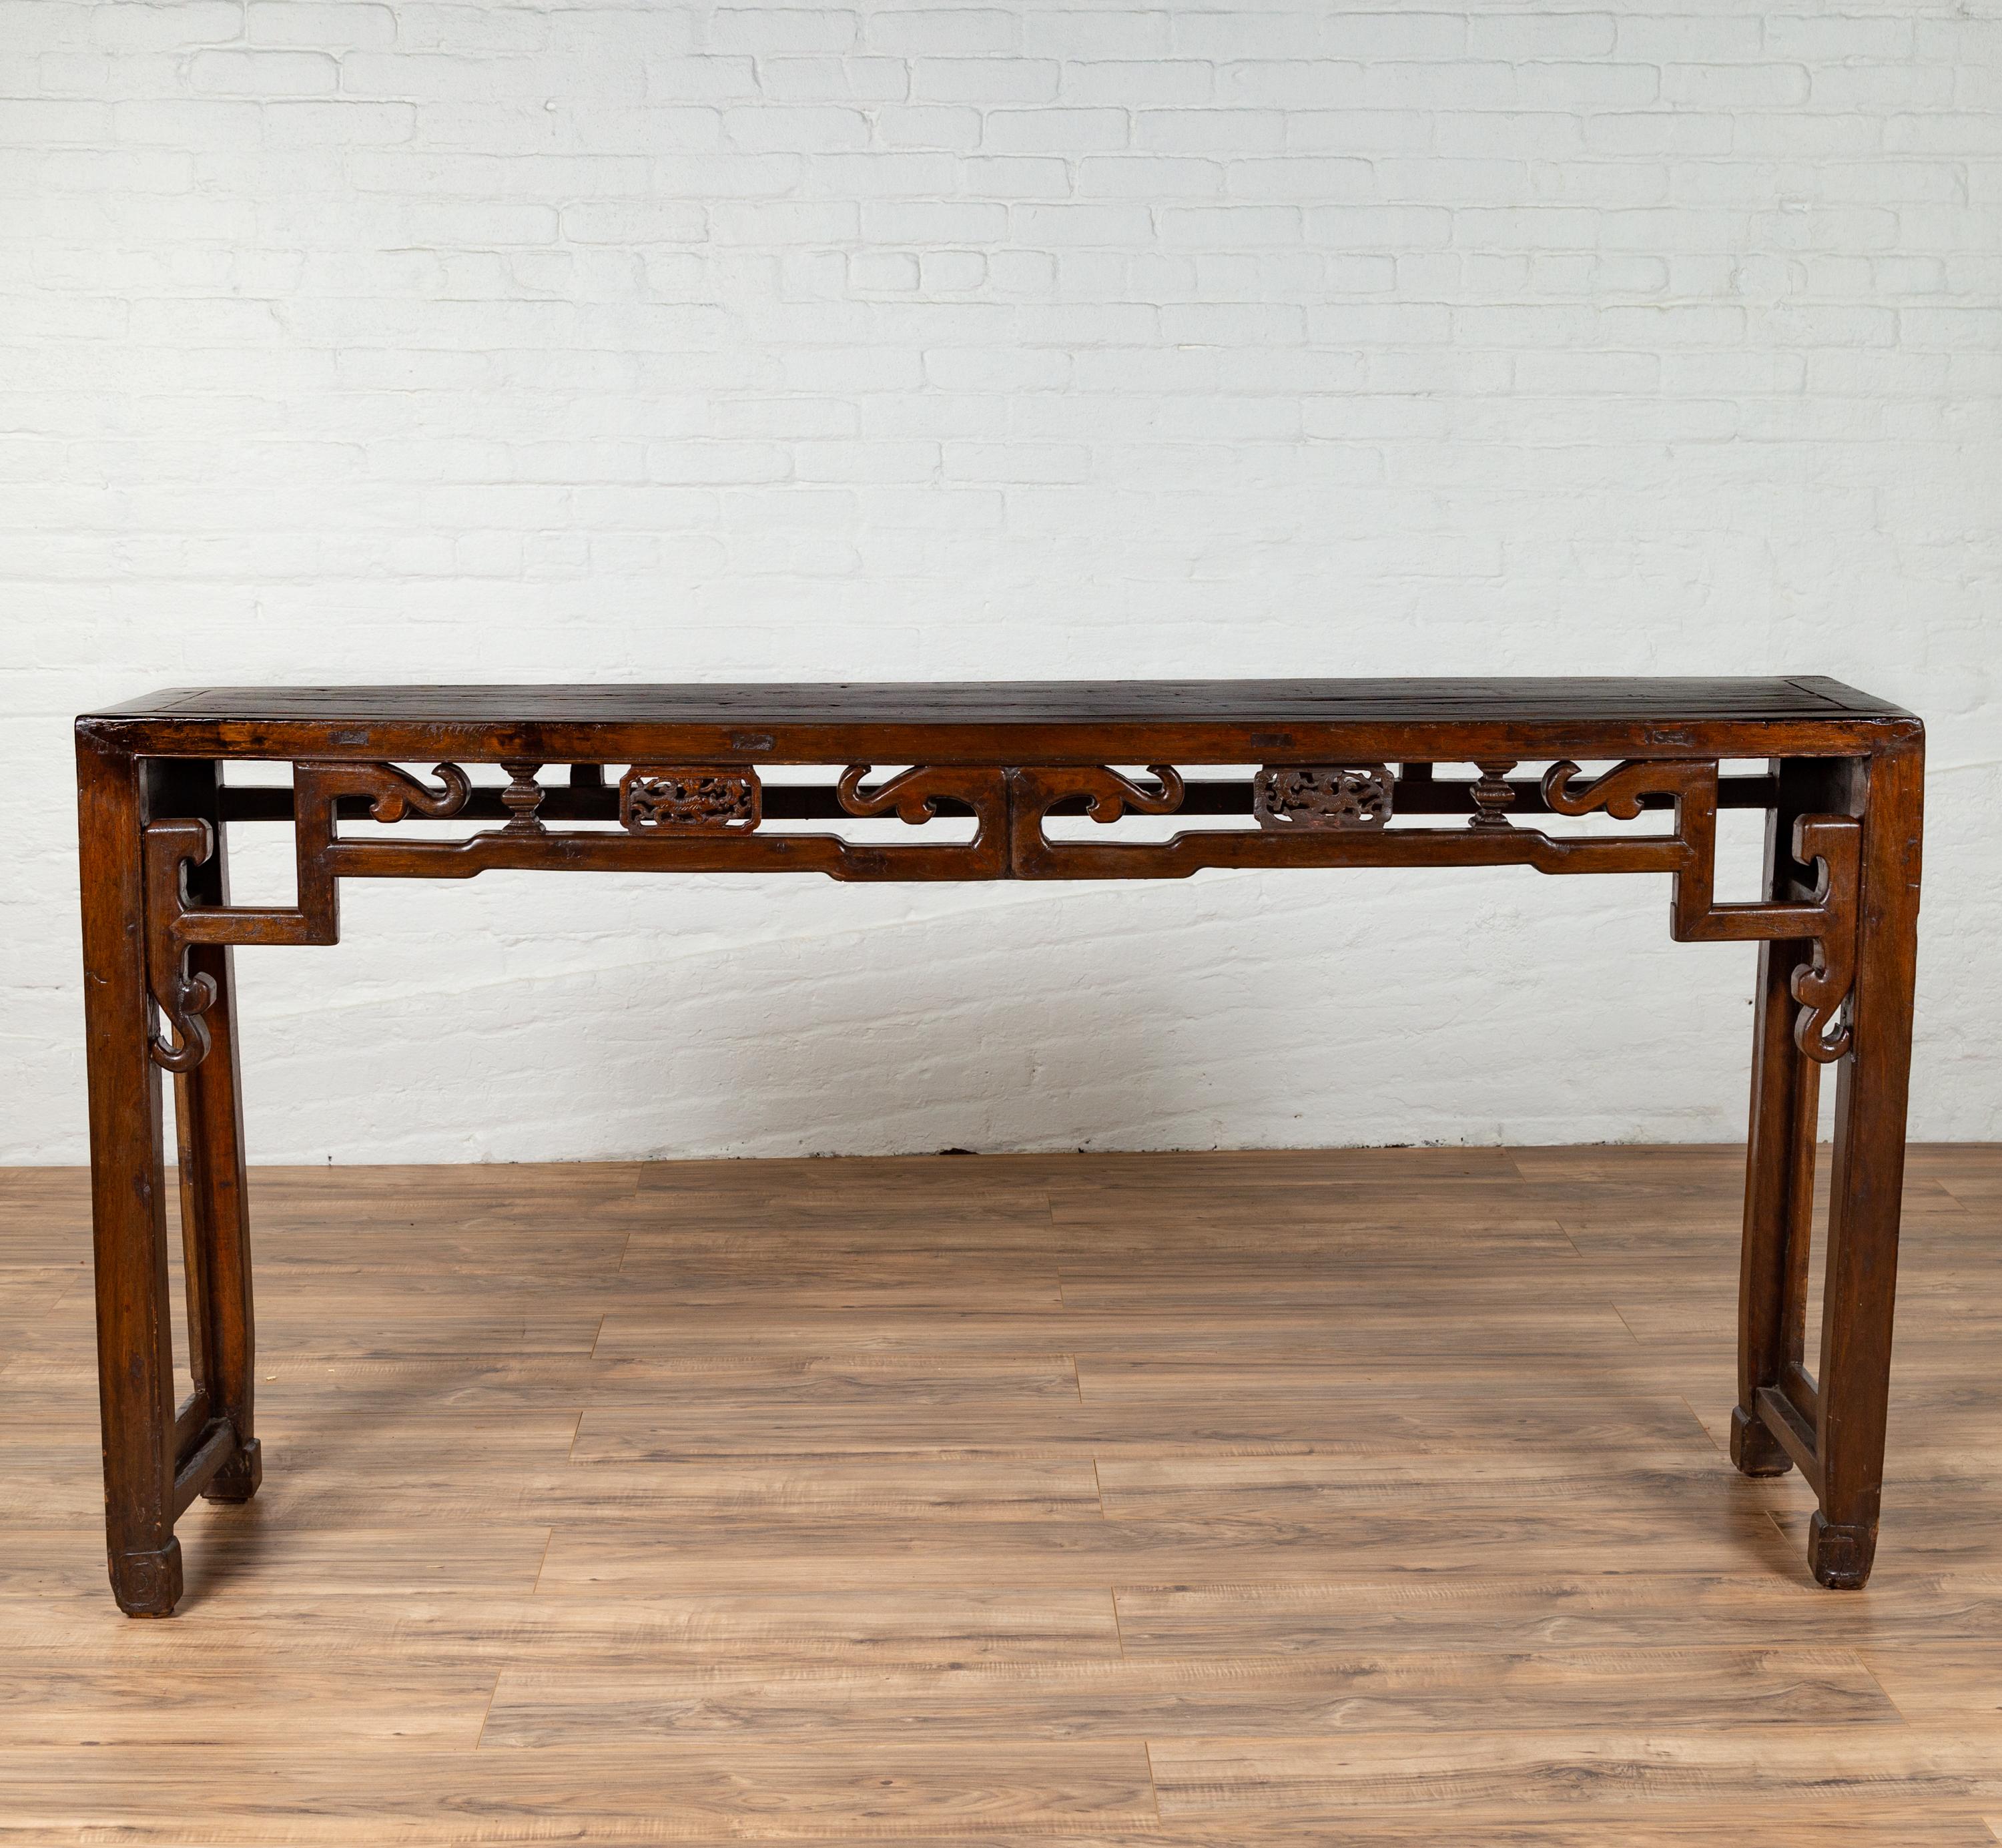 A Chinese narrow altar console table from the 19th century, with open fretwork frieze, horse hoof legs and unusual raised panels. Born in China during the 19th century, this exquisite wooden altar console table features a narrow rectangular top with